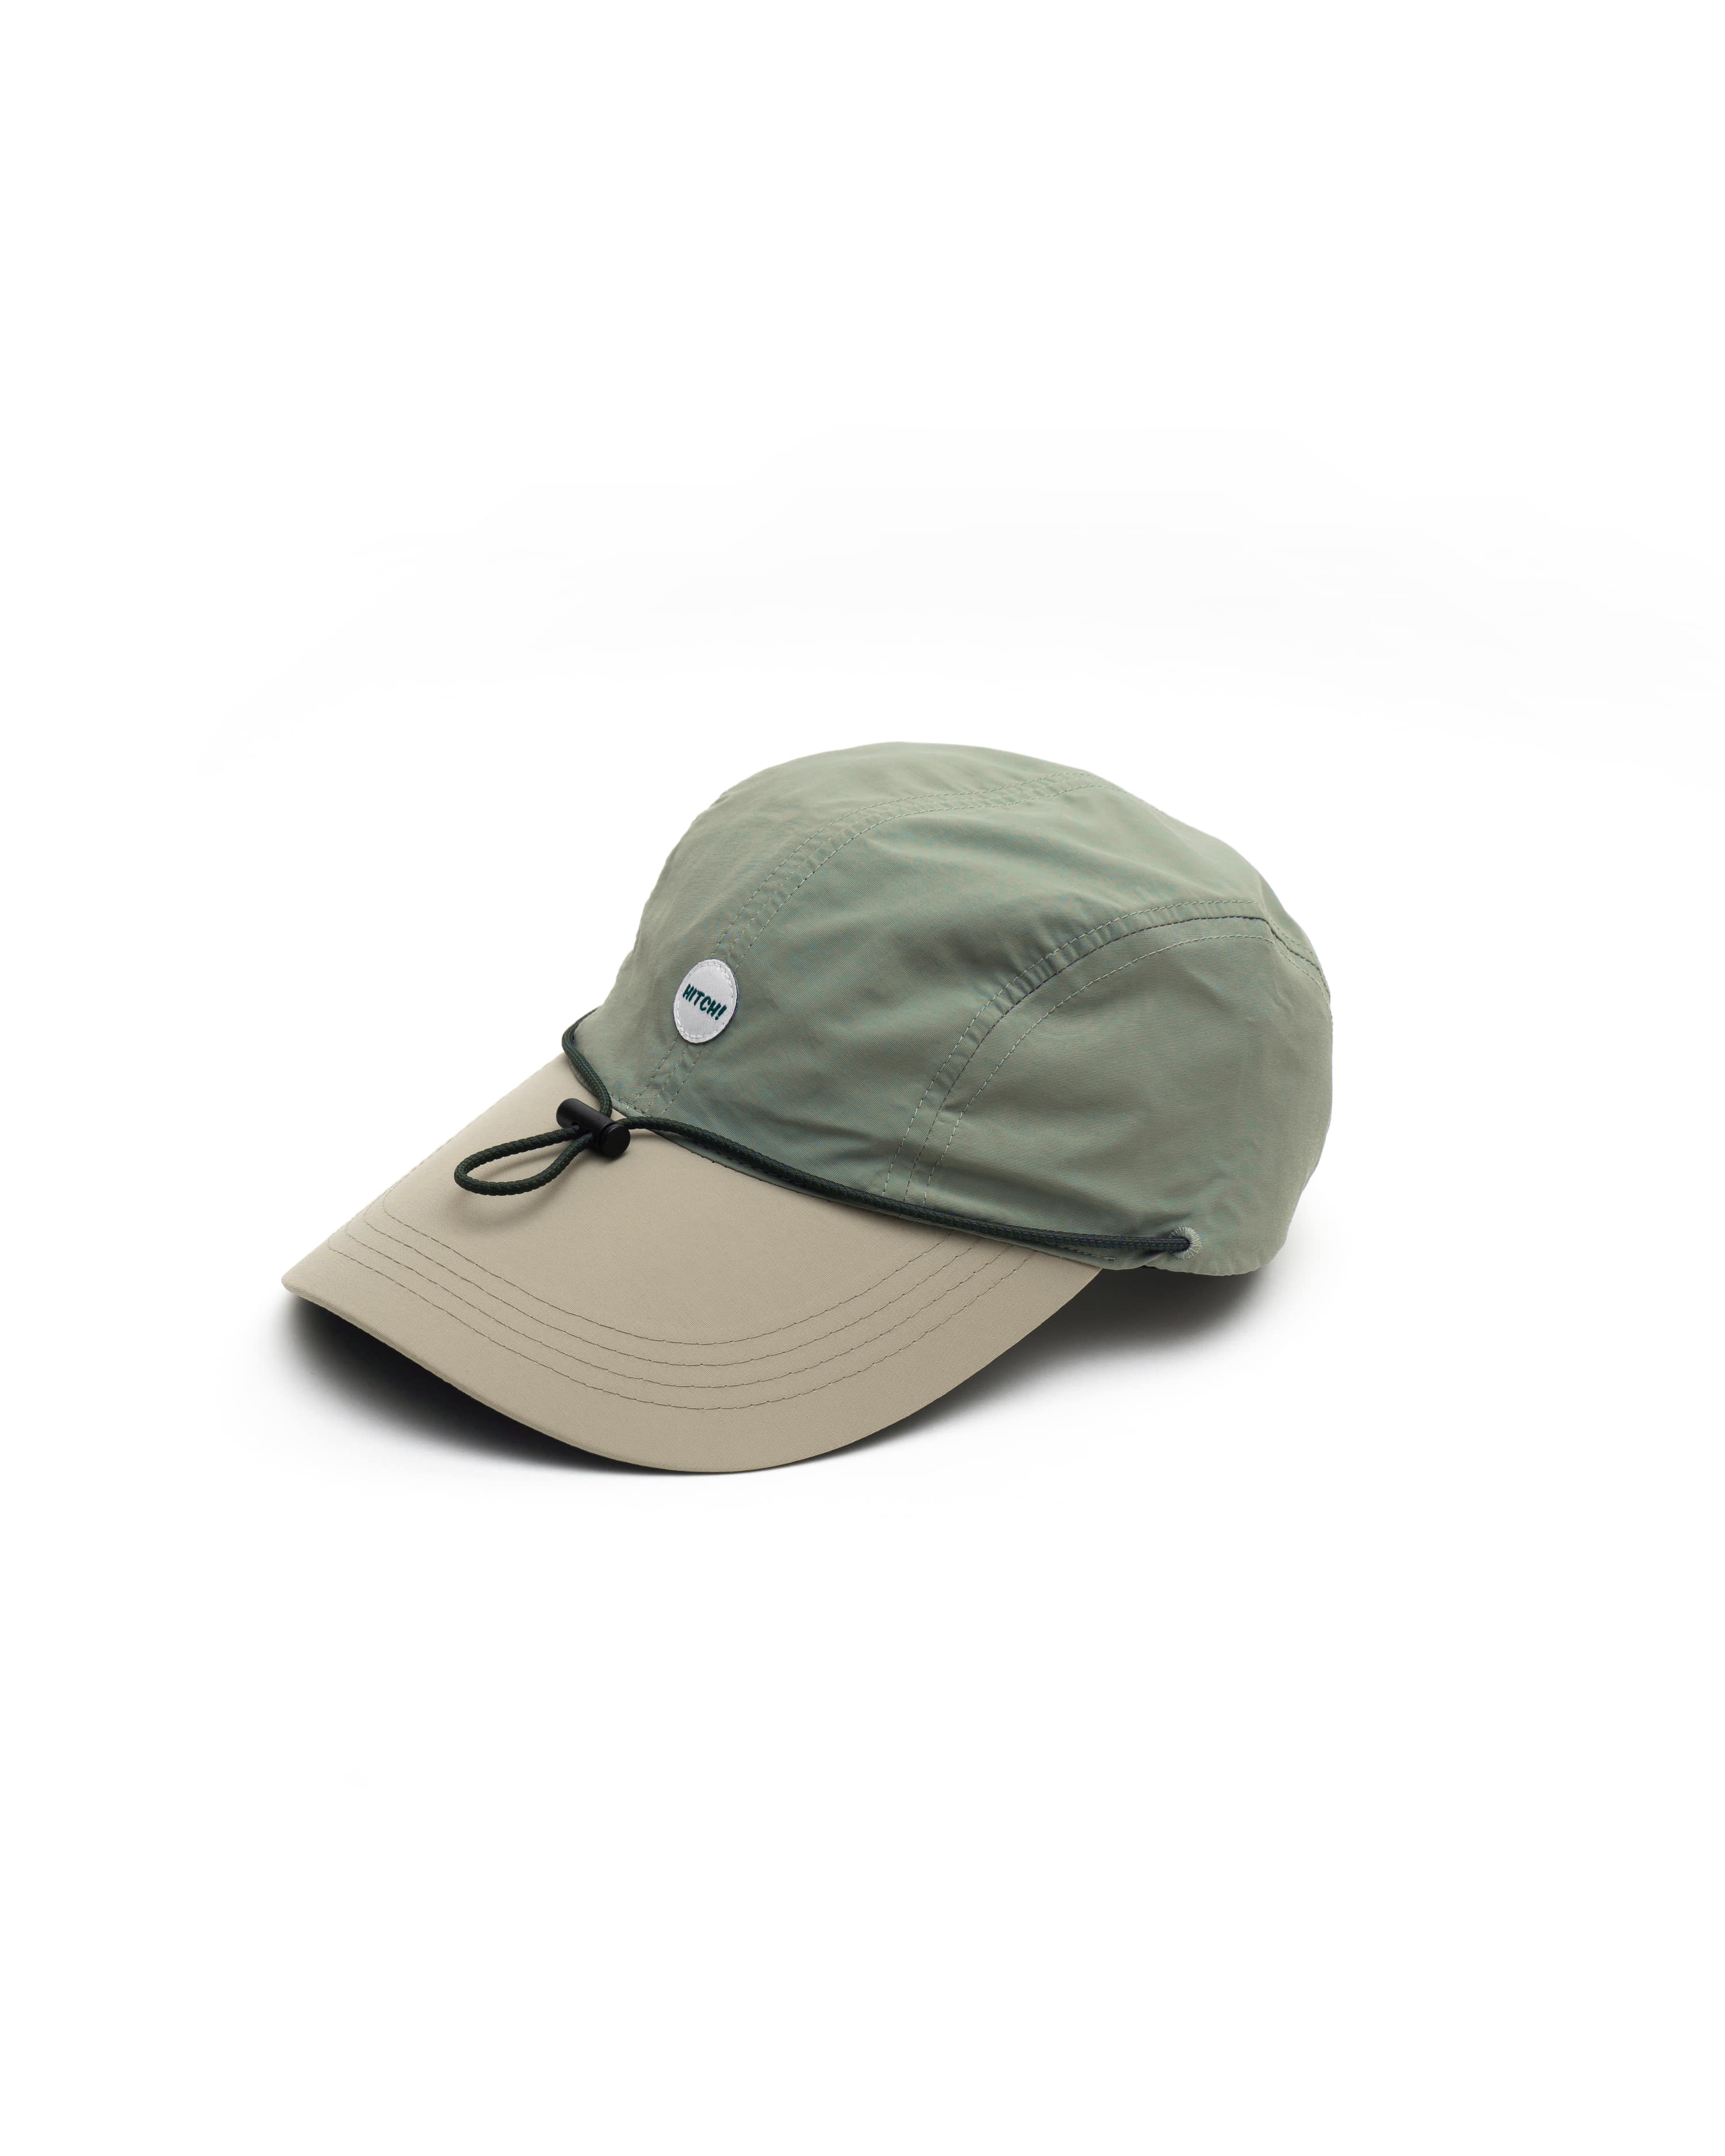 [out of stock] River - Olive gray (Longbill)